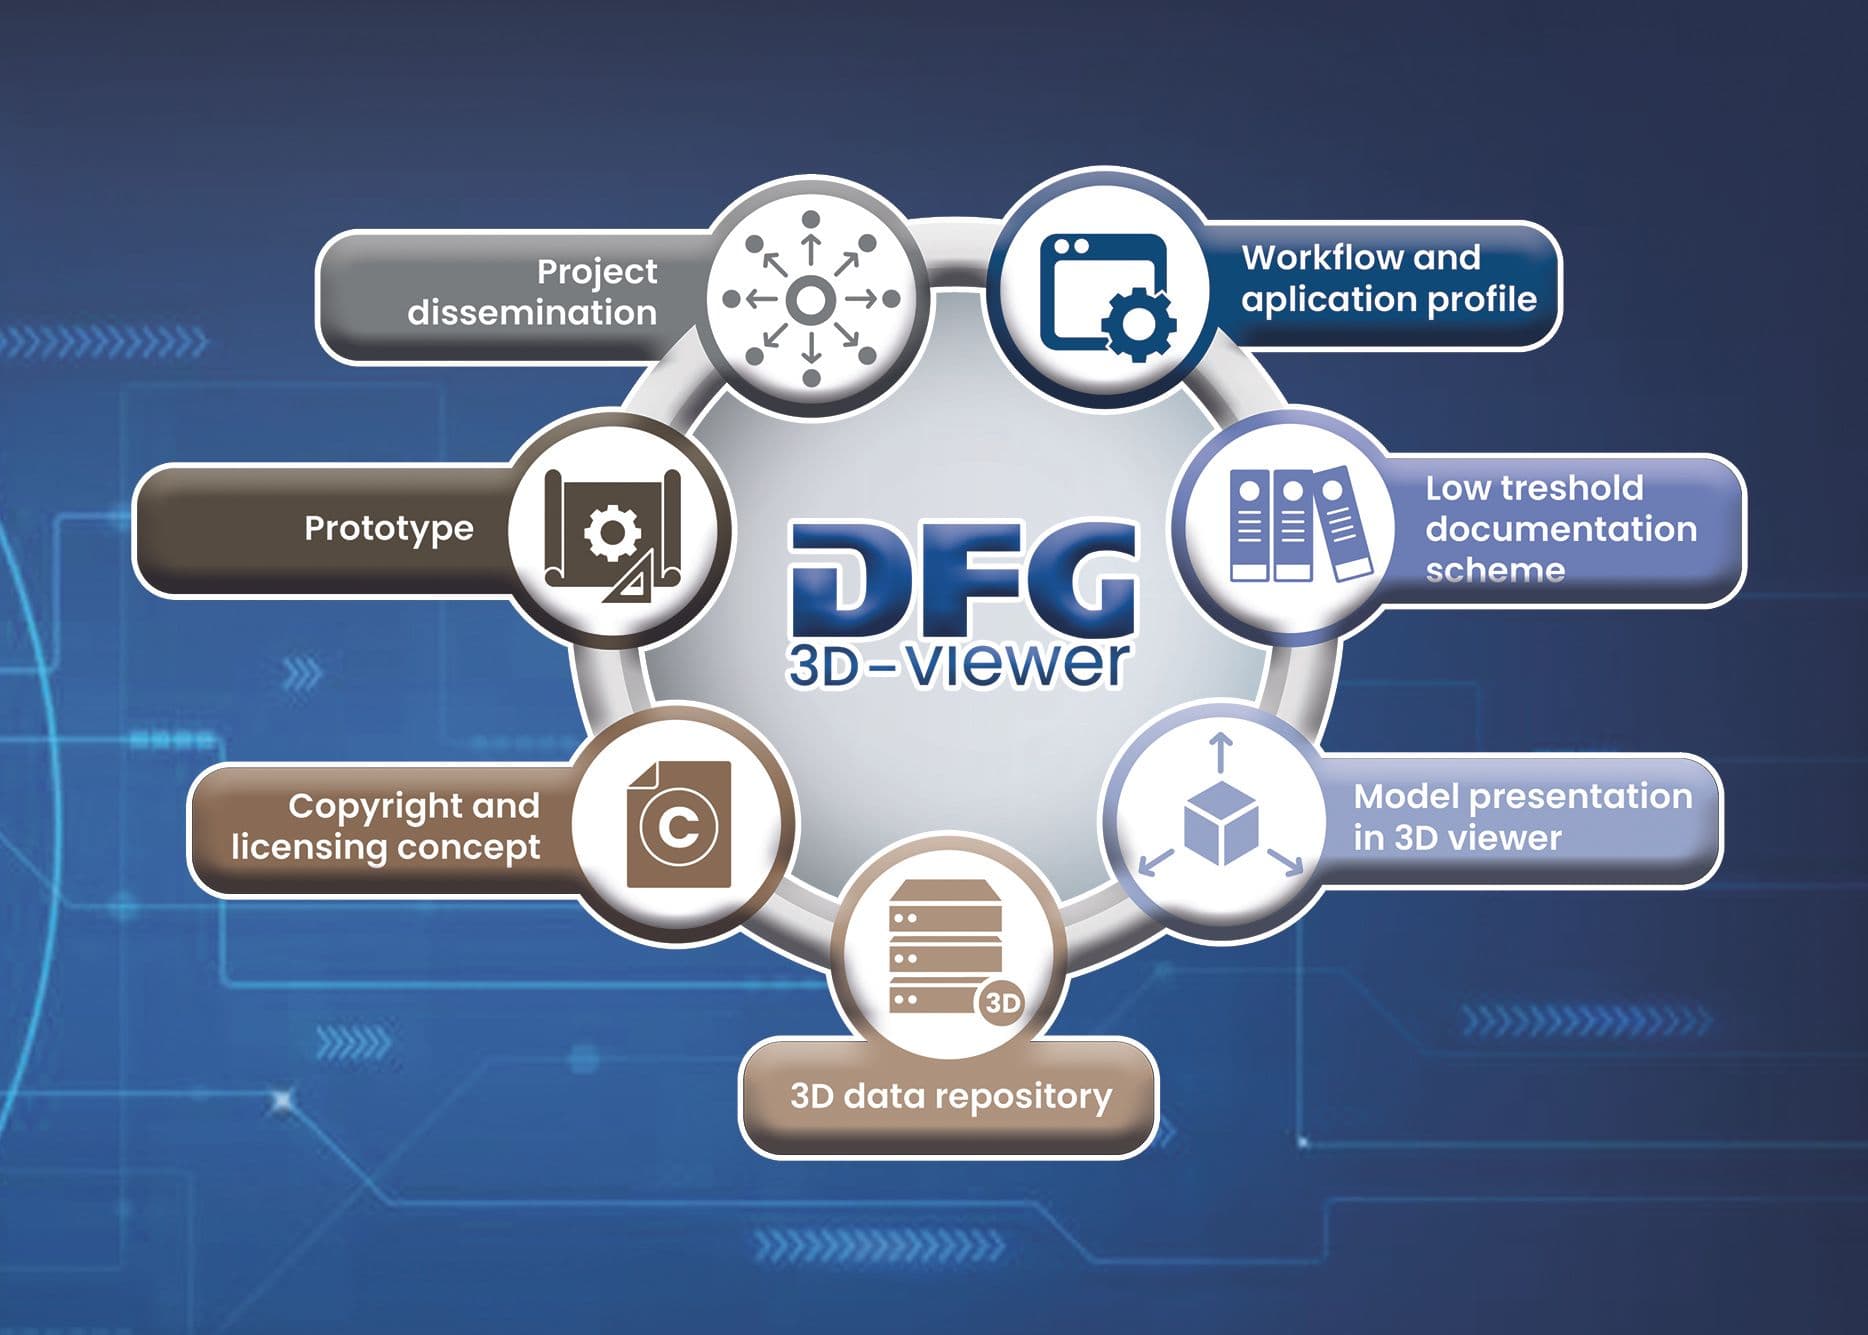 Picture of Fig. 1 Goals of first phase of DFG 3D-Viewer project